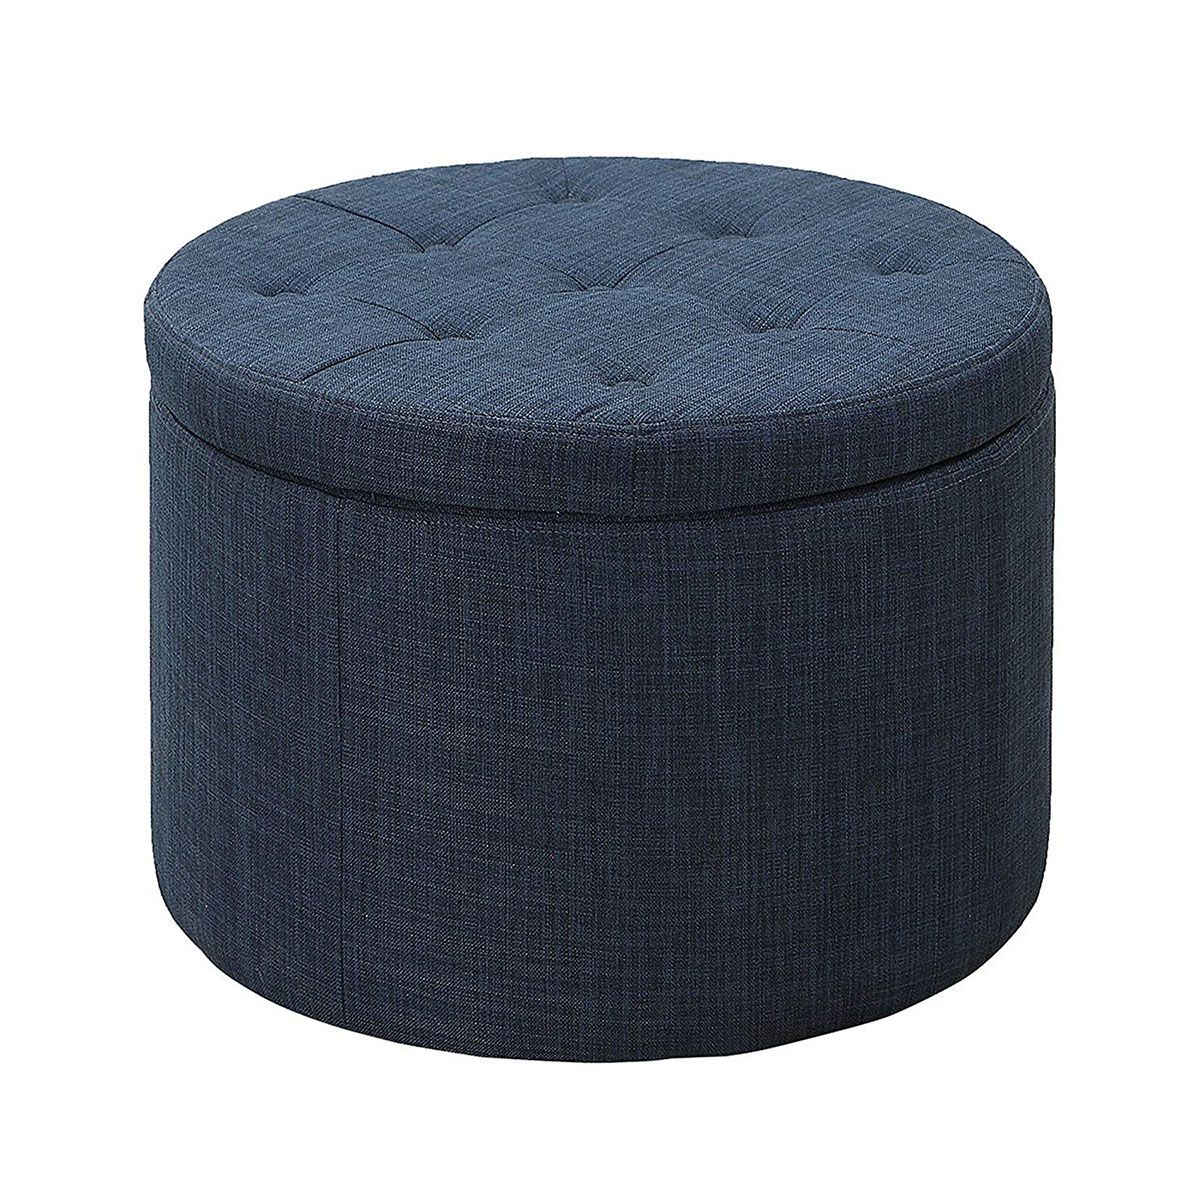 Pouf Textured Blue Round Pouf Ottomans Throughout Widely Used Convenience Concepts R9 155 Designs4comfort Round Shoe Ottoman, Blue (View 2 of 10)